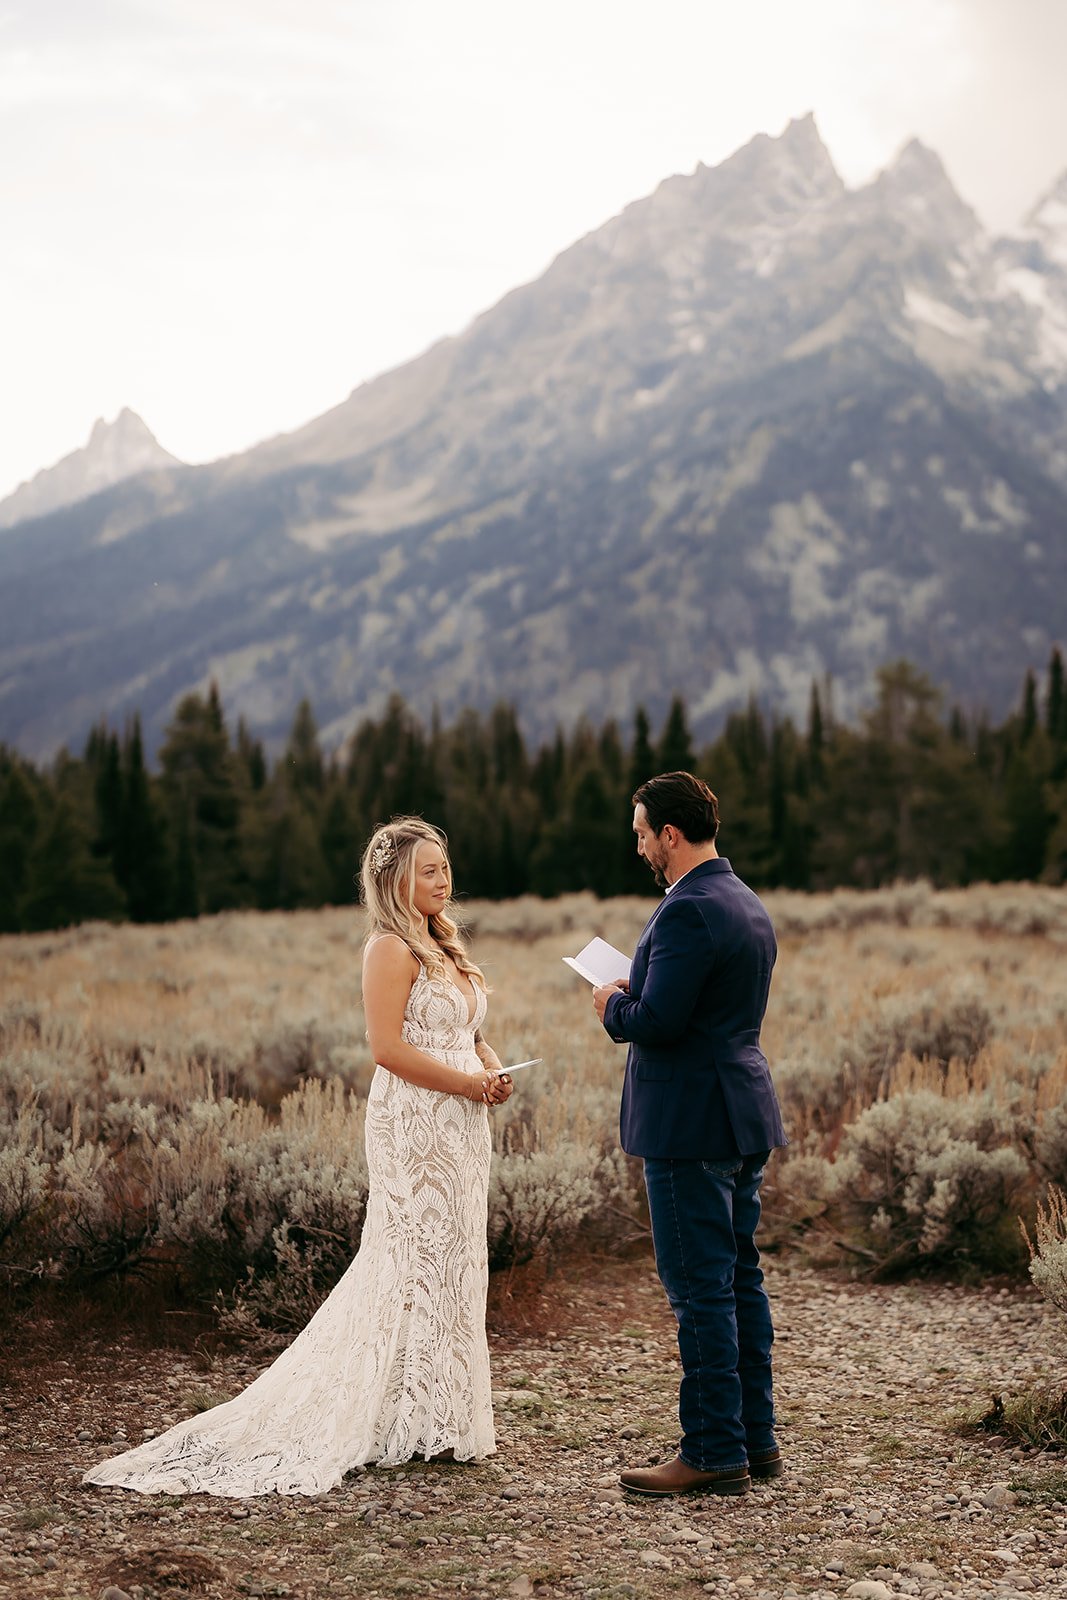 Why Should GTNP Should Be on Your Short List of Elopement Locations